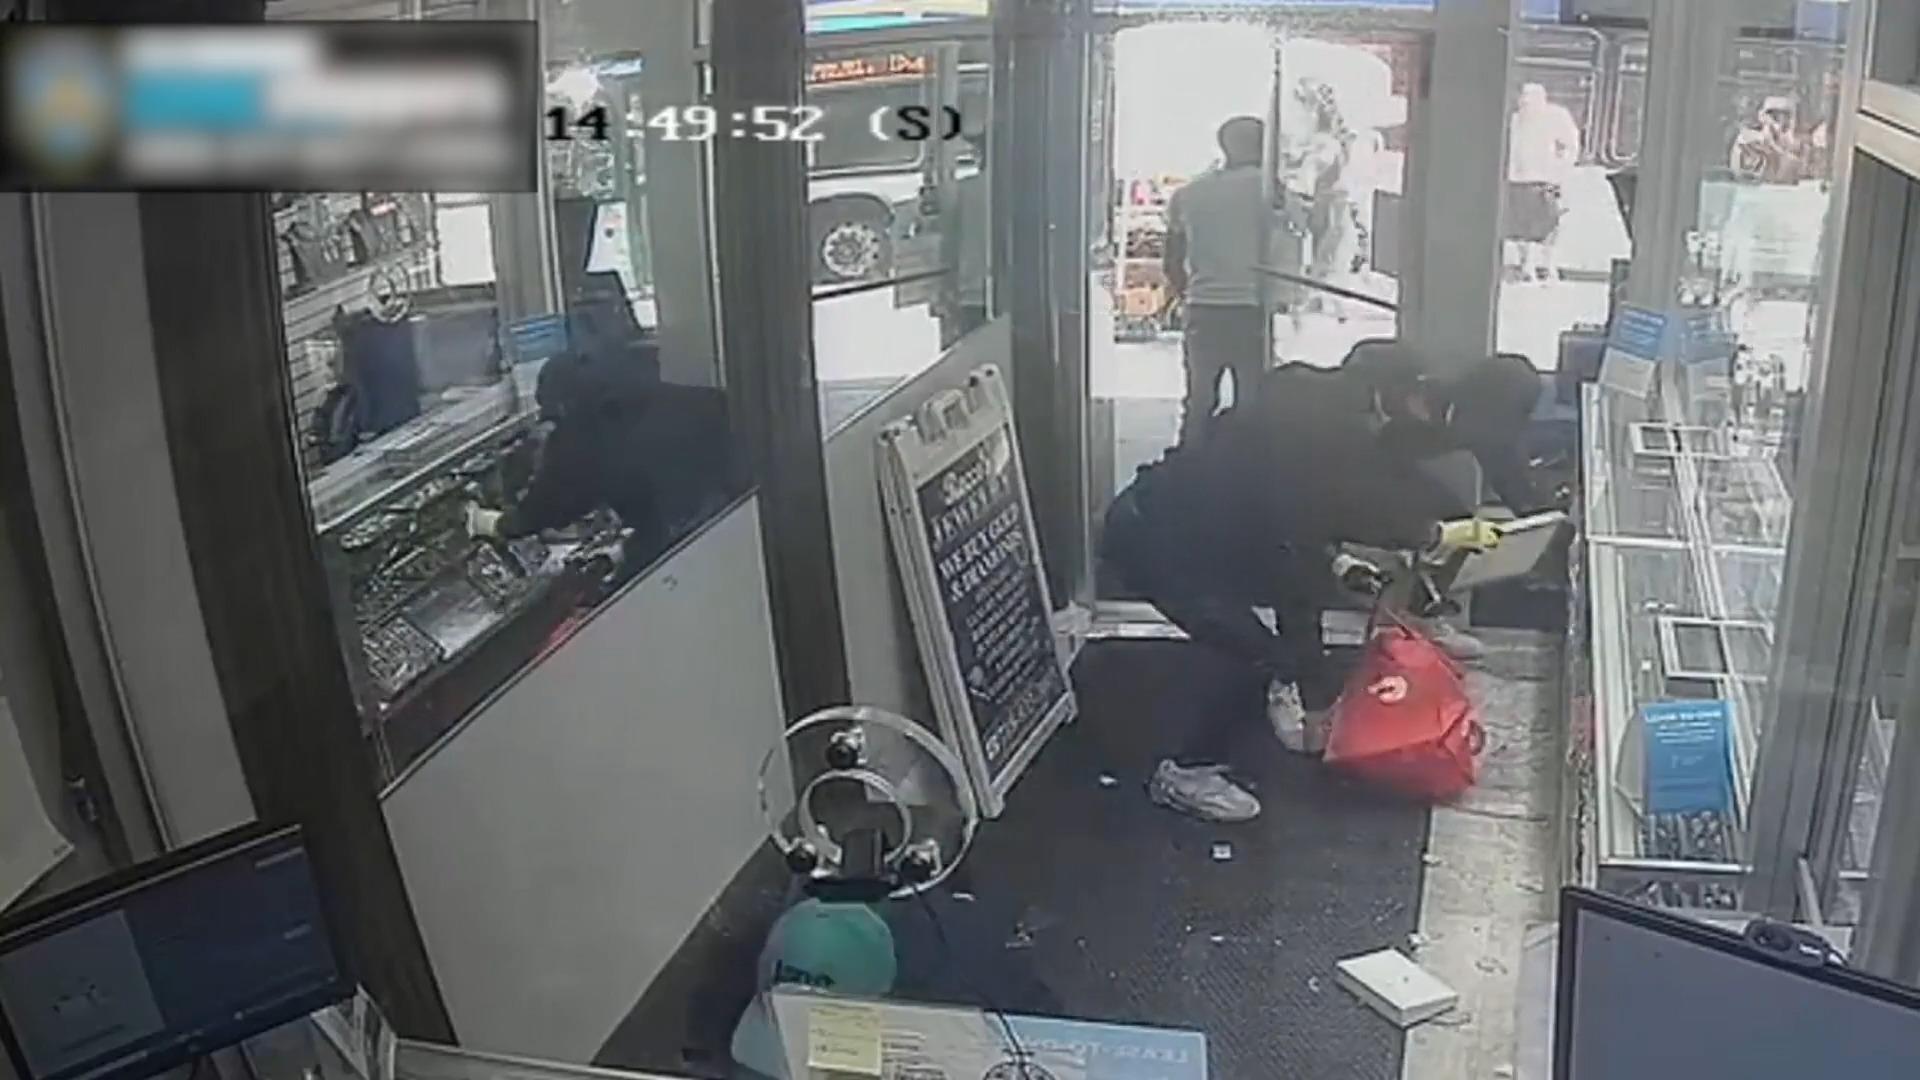 Men rob a jewelry store in broad daylight for $2 million in 30 seconds